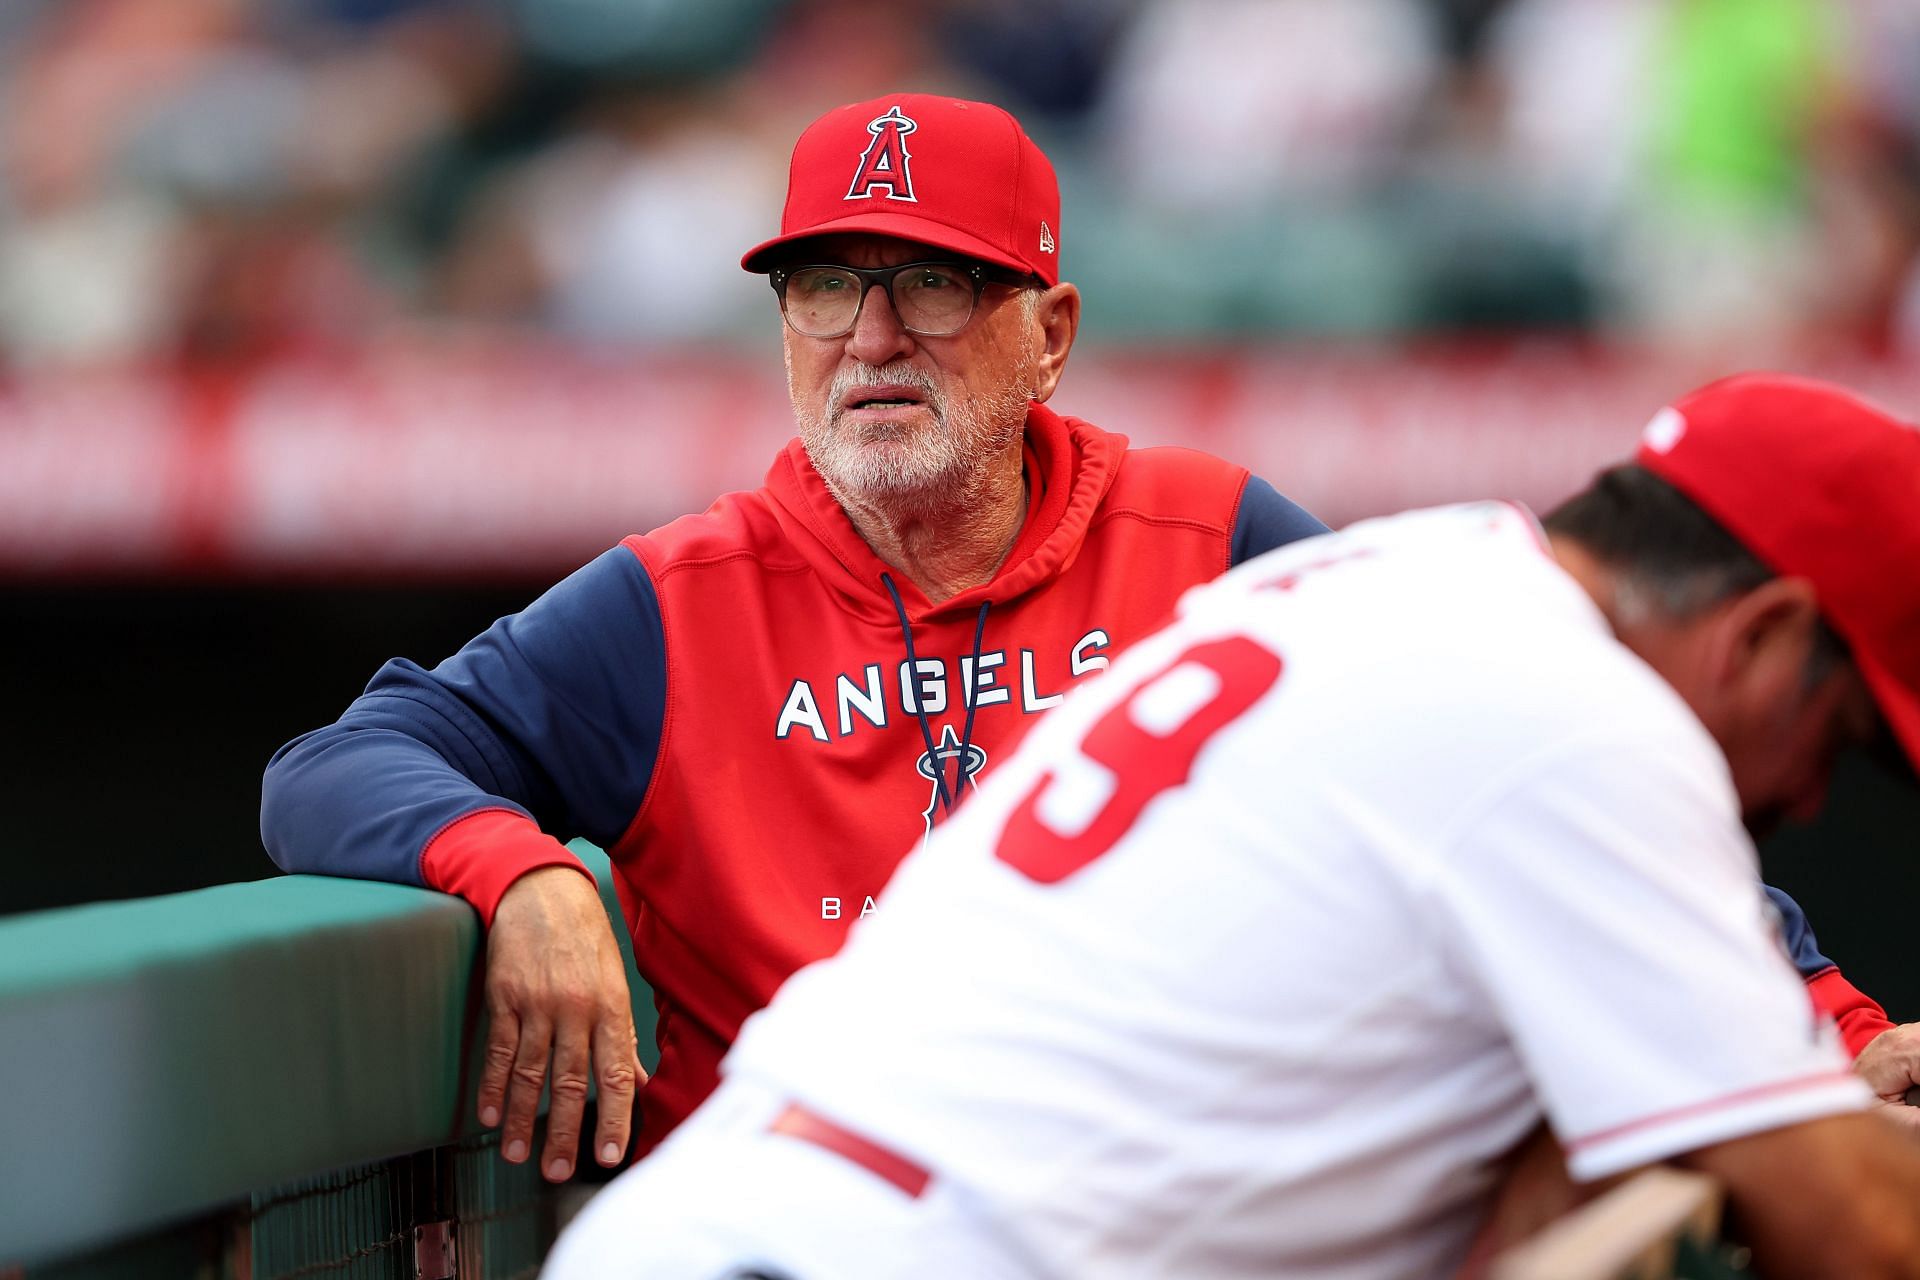 No tampering in Joe Maddon's move to Cubs, MLB rules